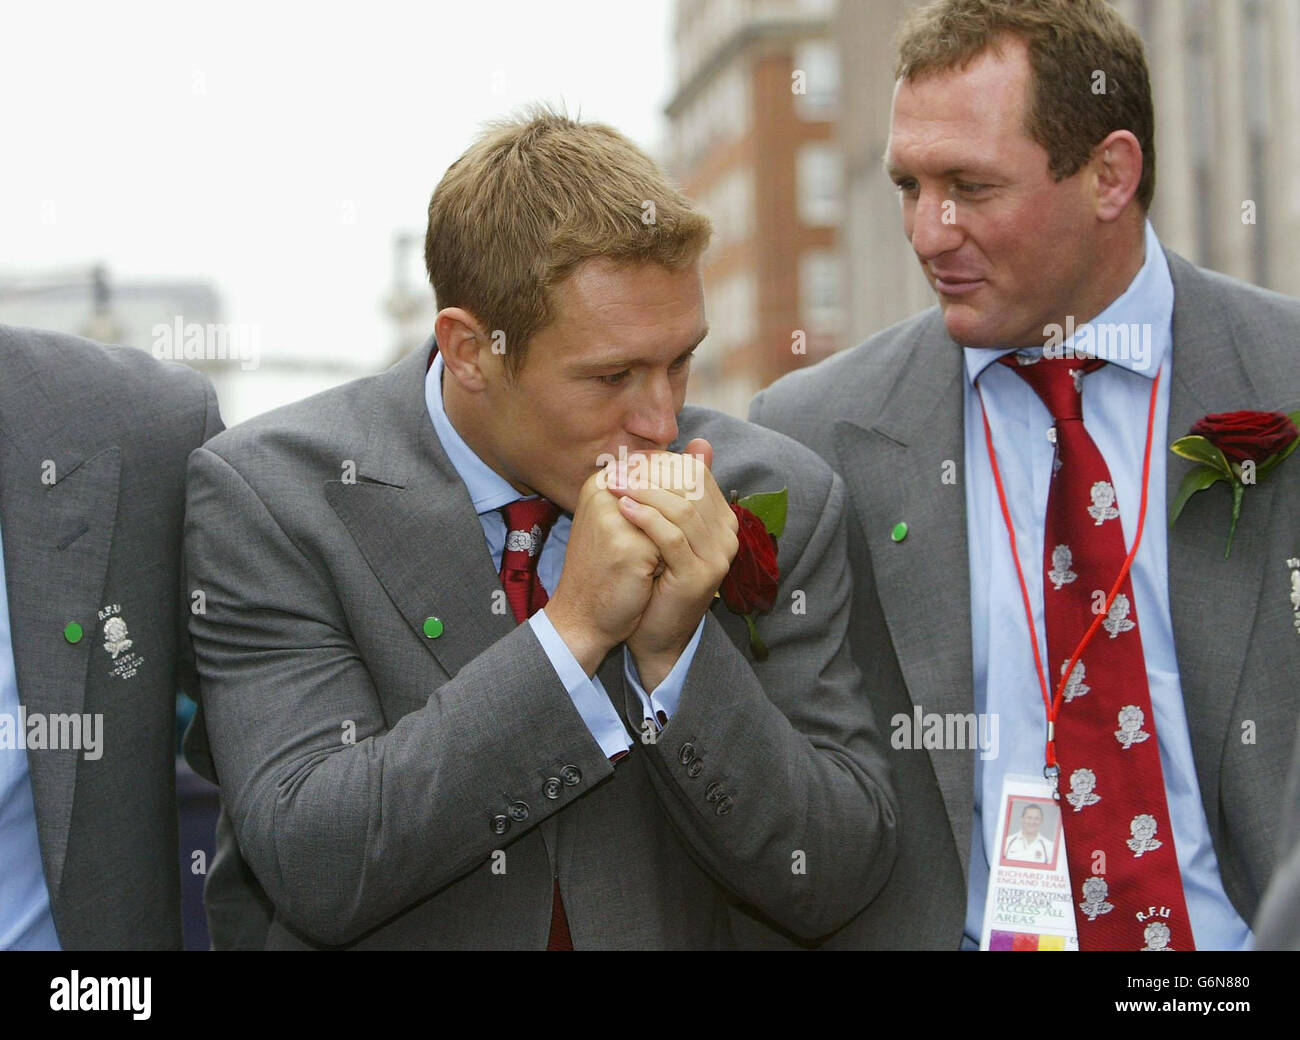 England player Jonny Wilkinson warms his hands during the England Rugby World Cup team victory parade in central London. The two open-topped buses arrived outside the National Gallery to a rapturous welcome from thousands of fans.The square was a sea of red and white flags as the nation's heroes waved to fans. Stock Photo